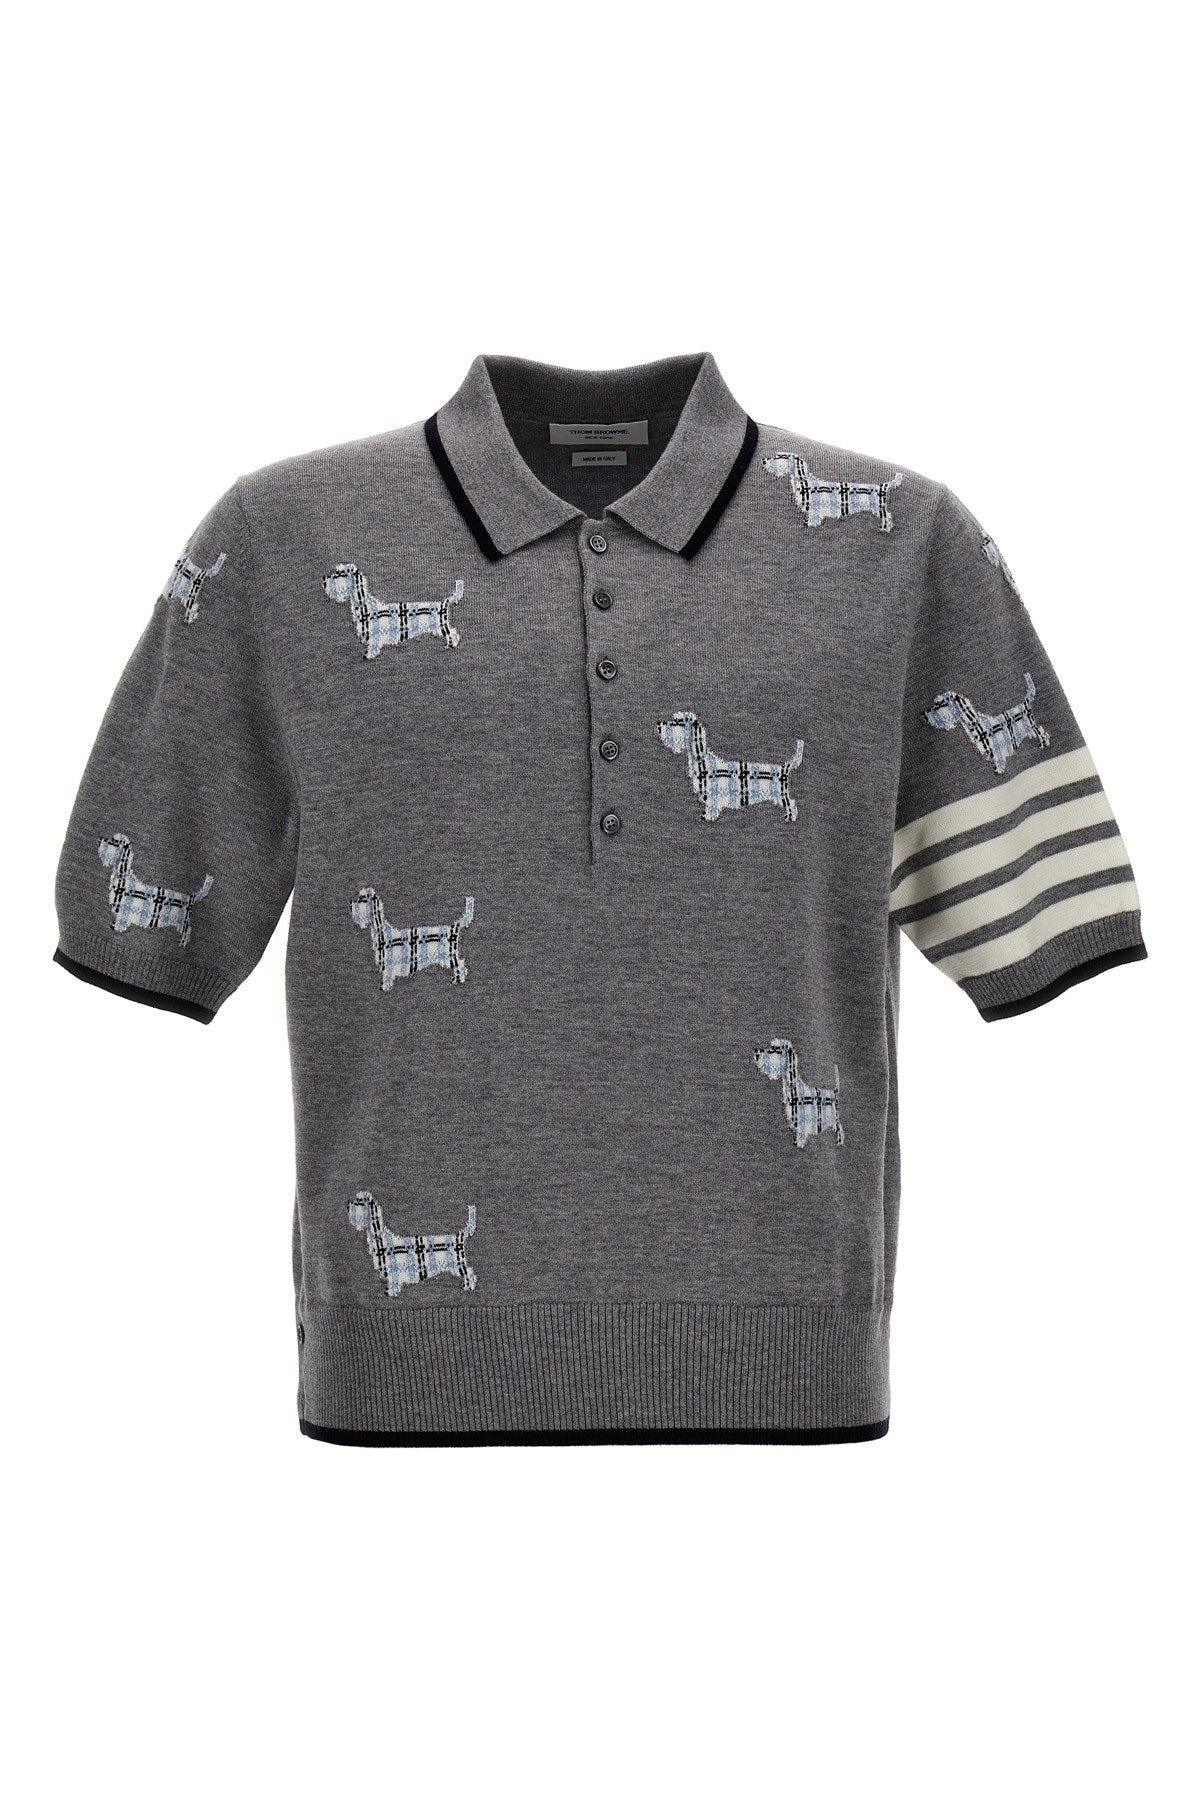 Thom Browne Men 'Hector' Polo Shirt - 1